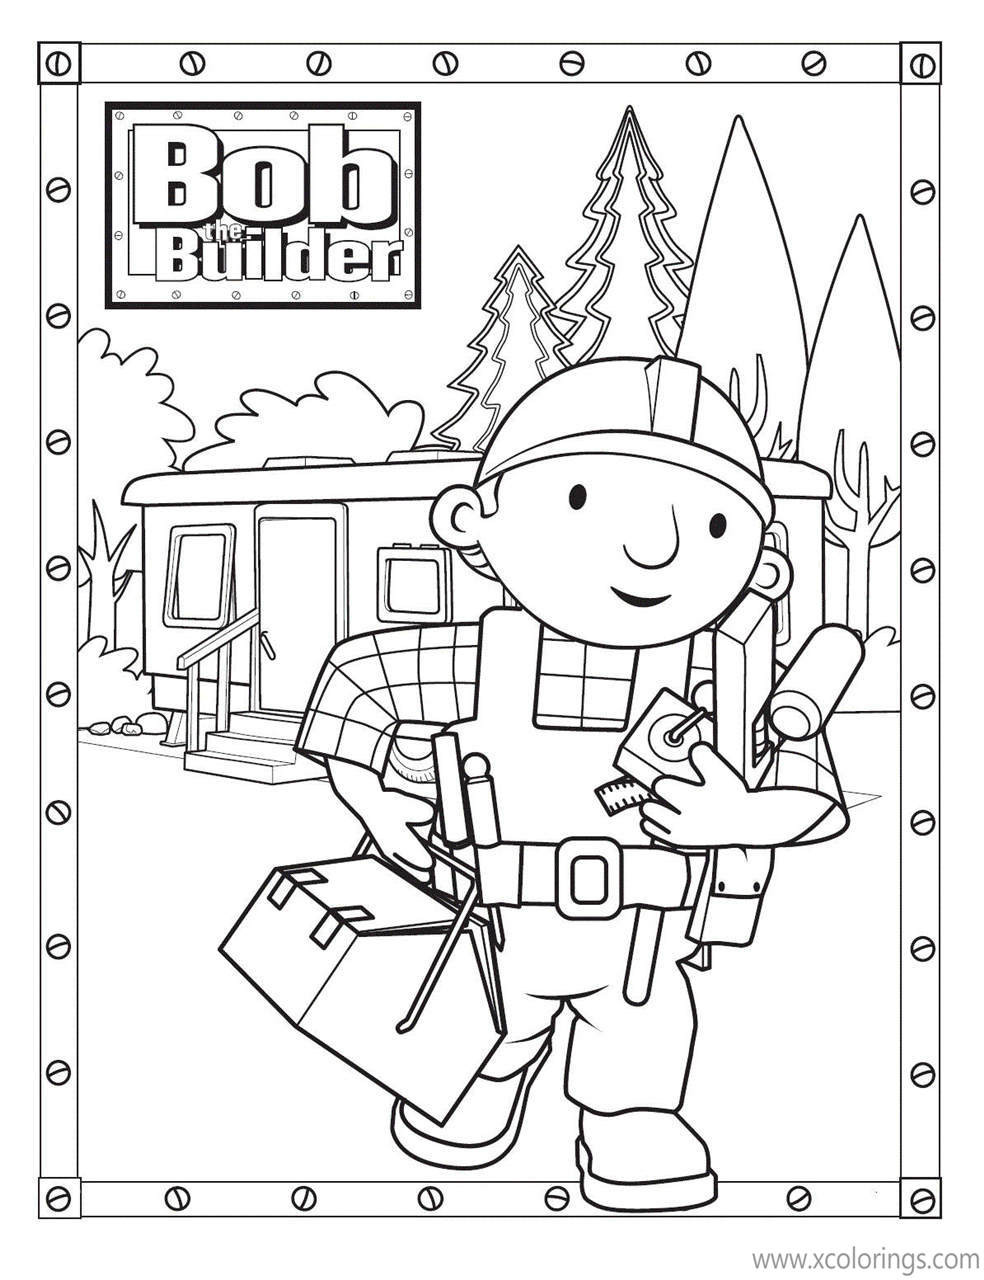 Free Bob The Builder Coloring Pages Bob with His Tools printable